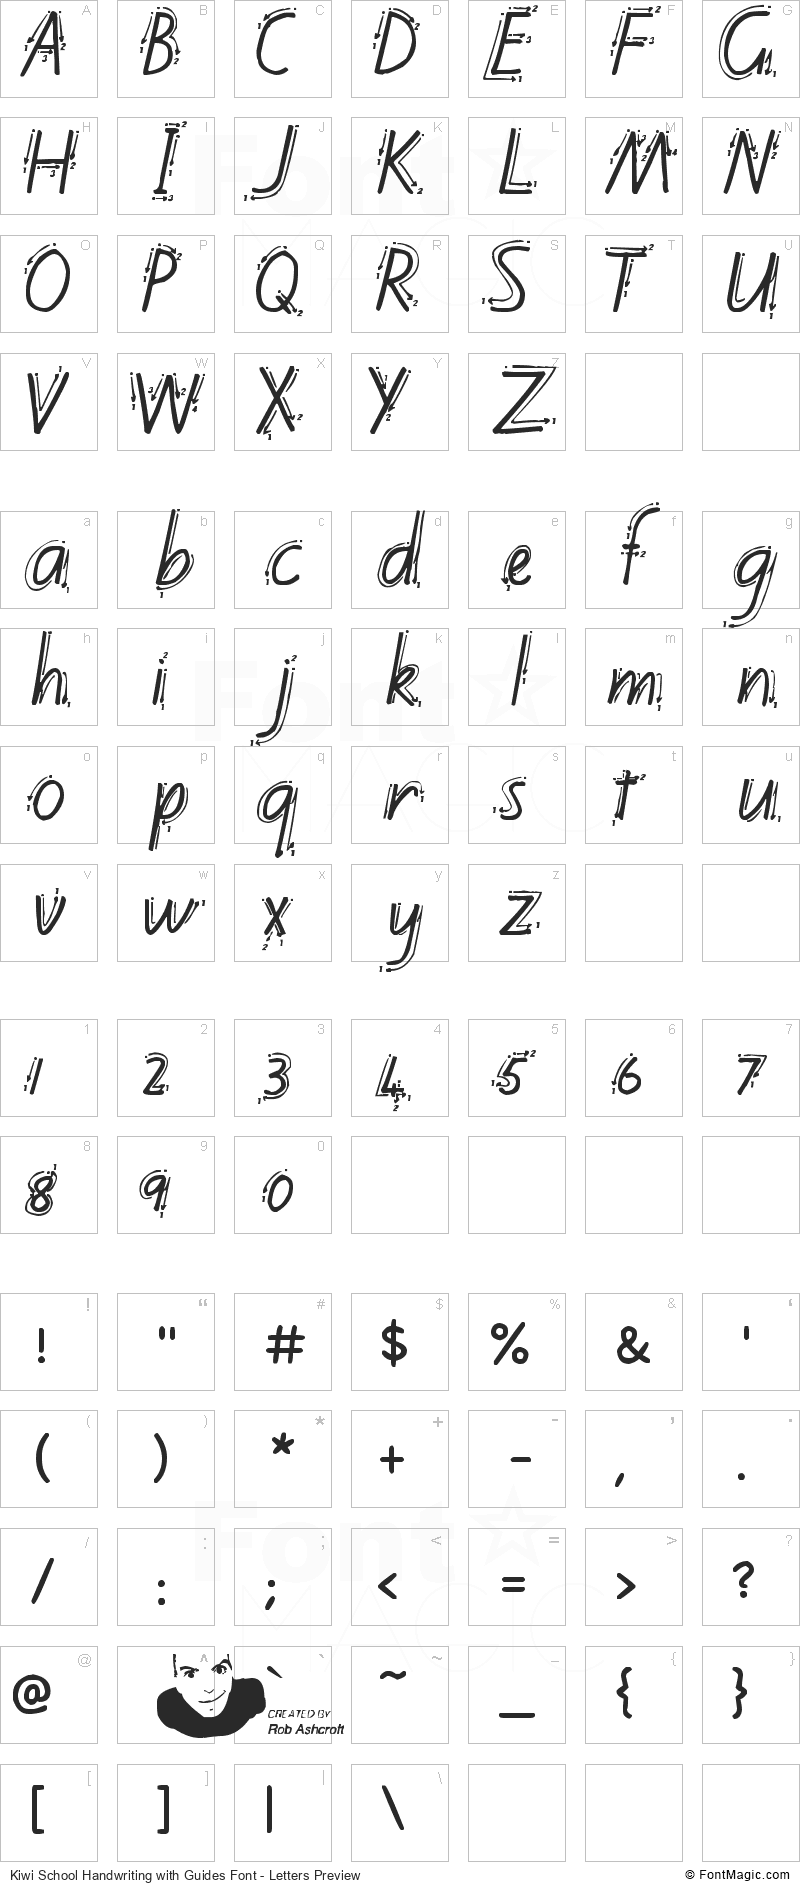 Kiwi School Handwriting with Guides Font - All Latters Preview Chart